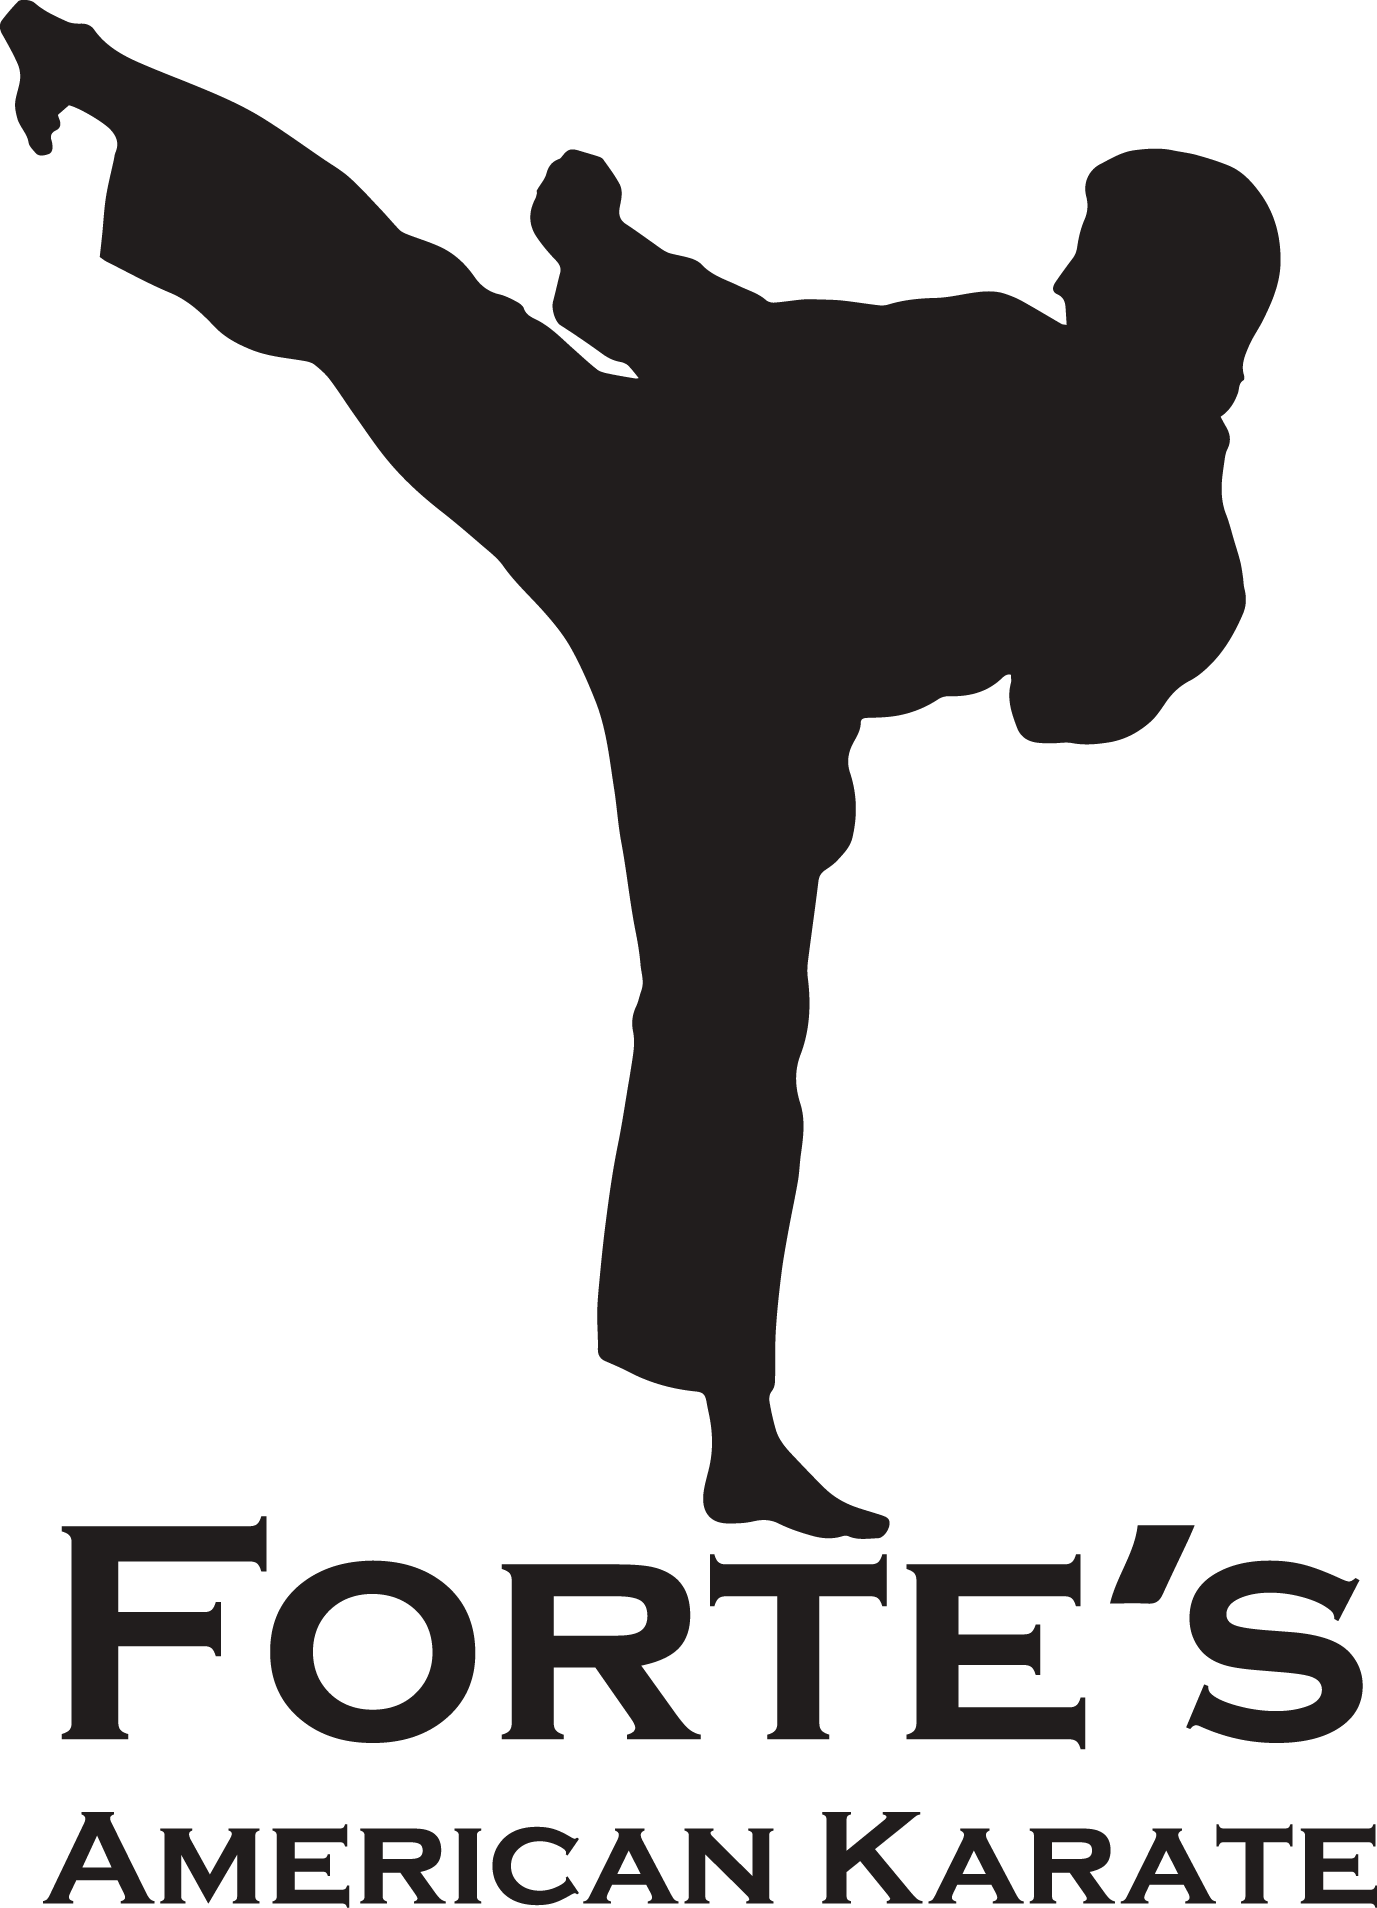 images/Fortes Karate Group.gif